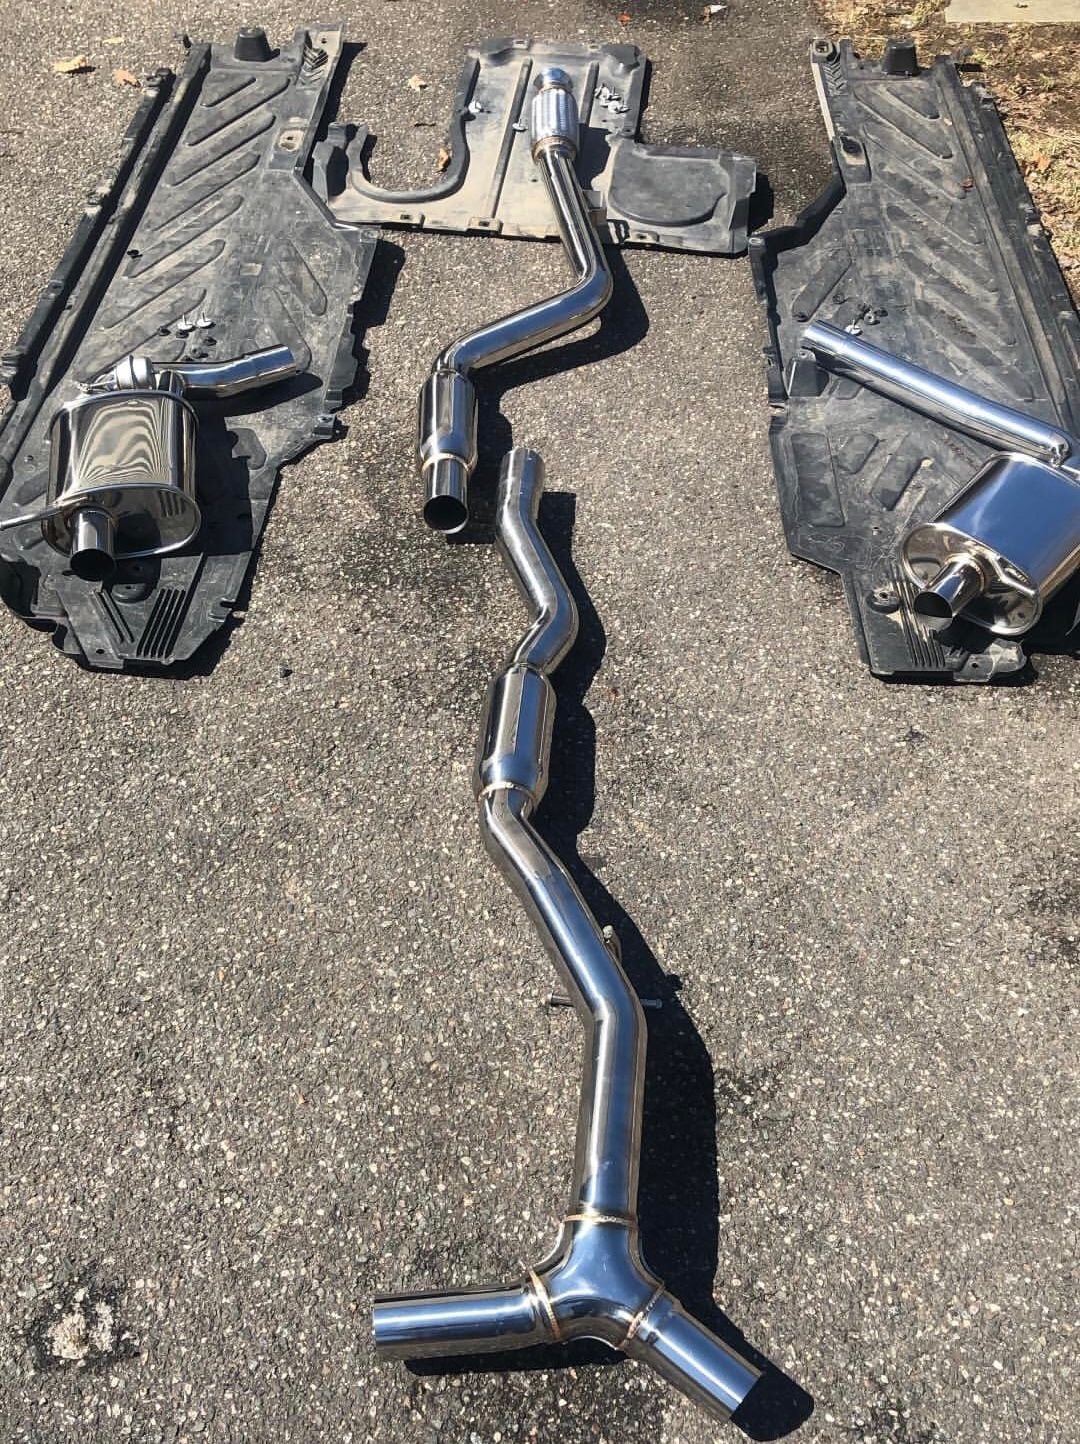 Engine - Exhaust - W205 C300 4MATIC Armytrix Valvetronic Exhaust for sale ! (Full Turbo-back system) - Used - 2015 to 2018 Mercedes-Benz C300 - New Haven, CT 06501, United States